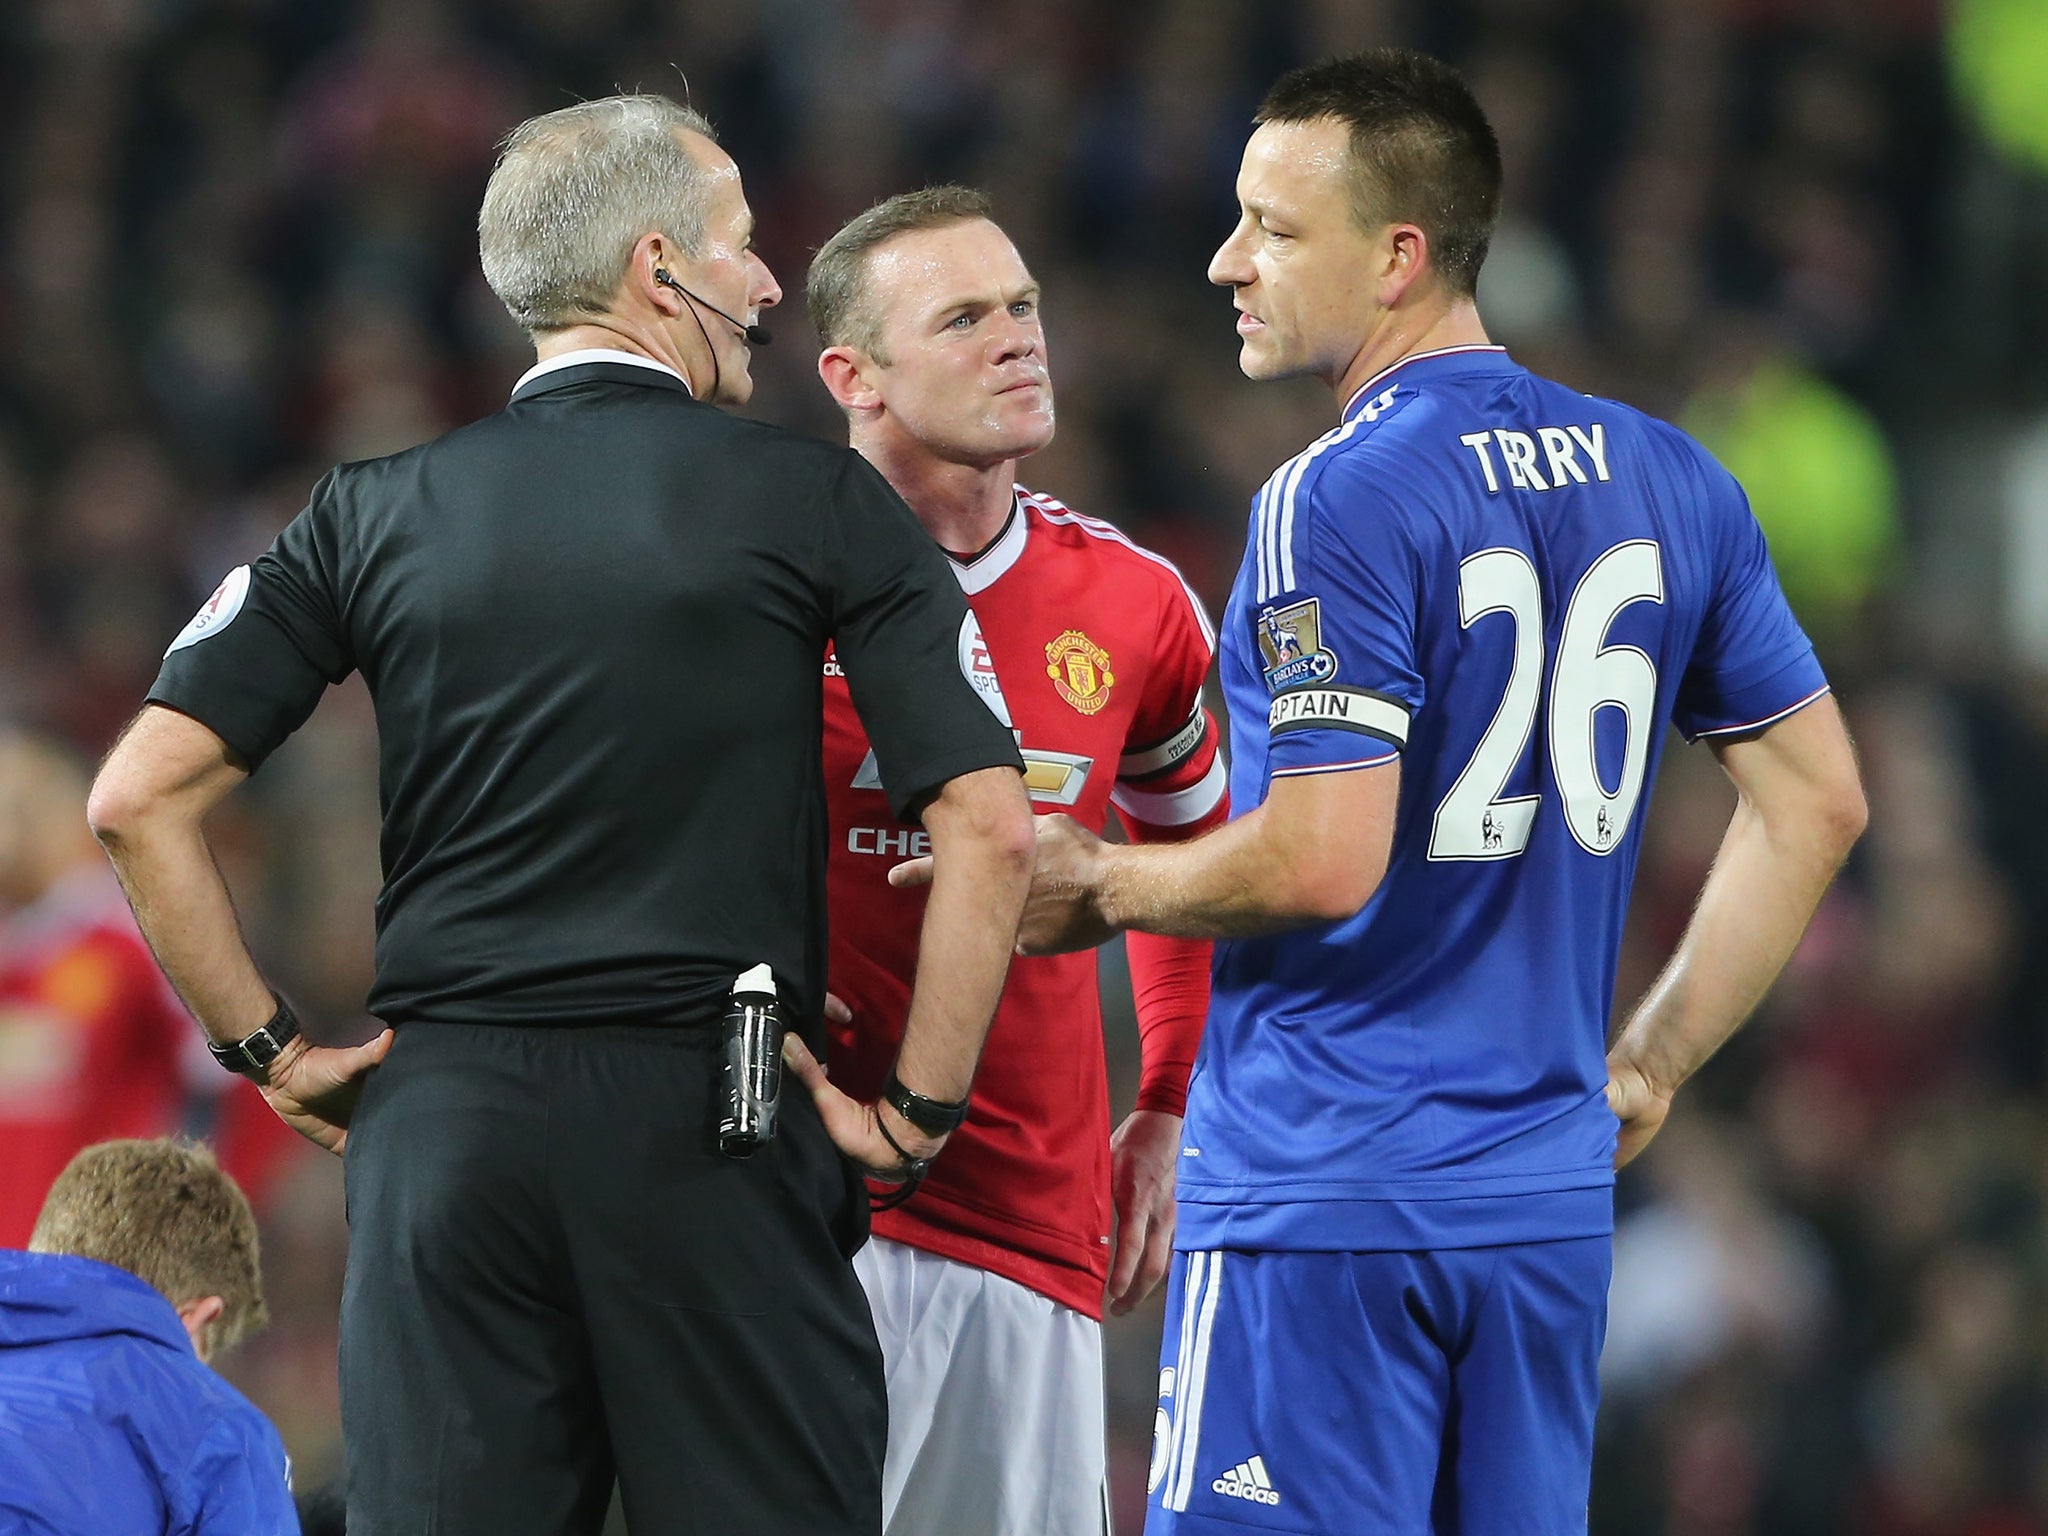 The captains, Wayne Rooney and John Terry with referee Martin Atkinson